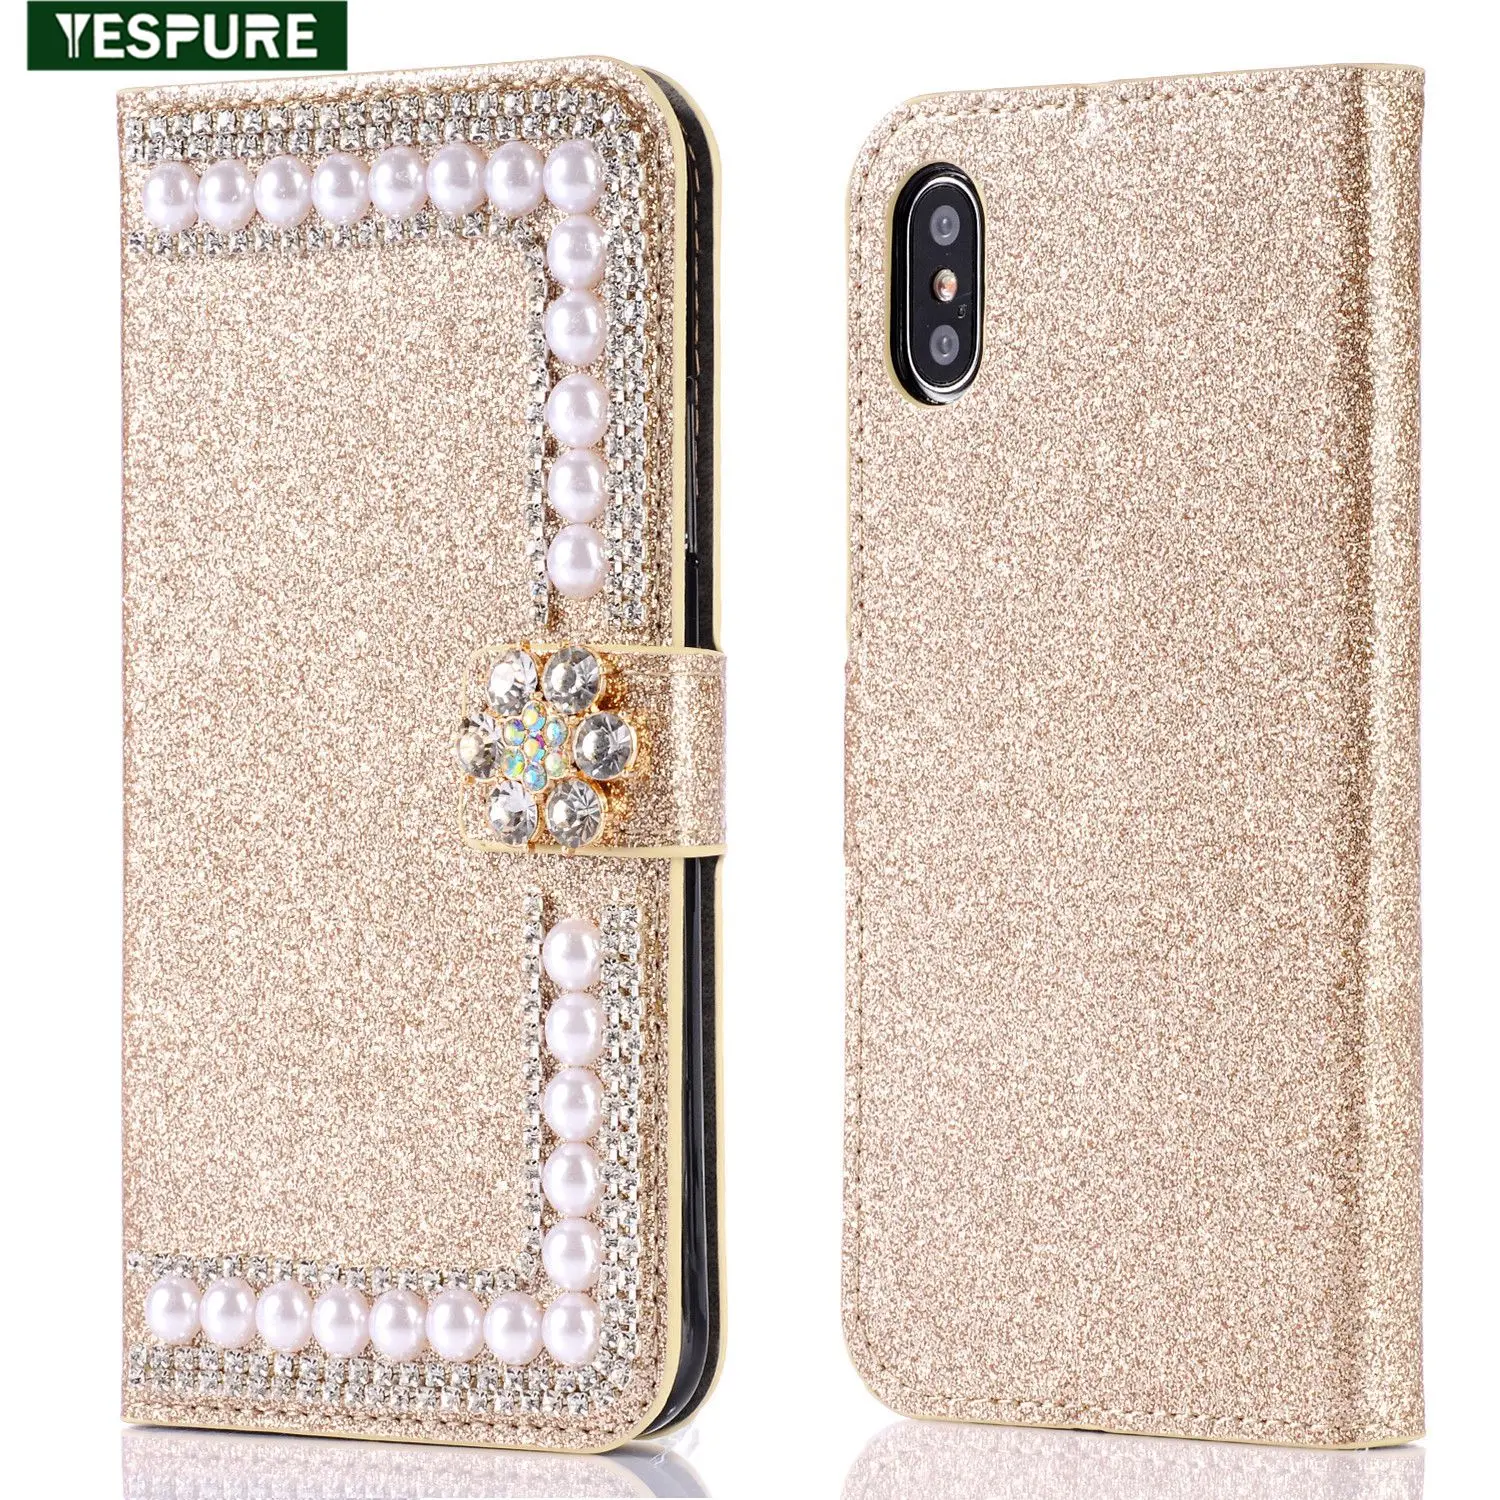 Herbests Compatible with Sony Xperia L2 Glitter Case Crystal Bling Sparkle Design PU Leather Wallet Case Protective Phone Cover with Card Slots and Stand,Dream Catcher 